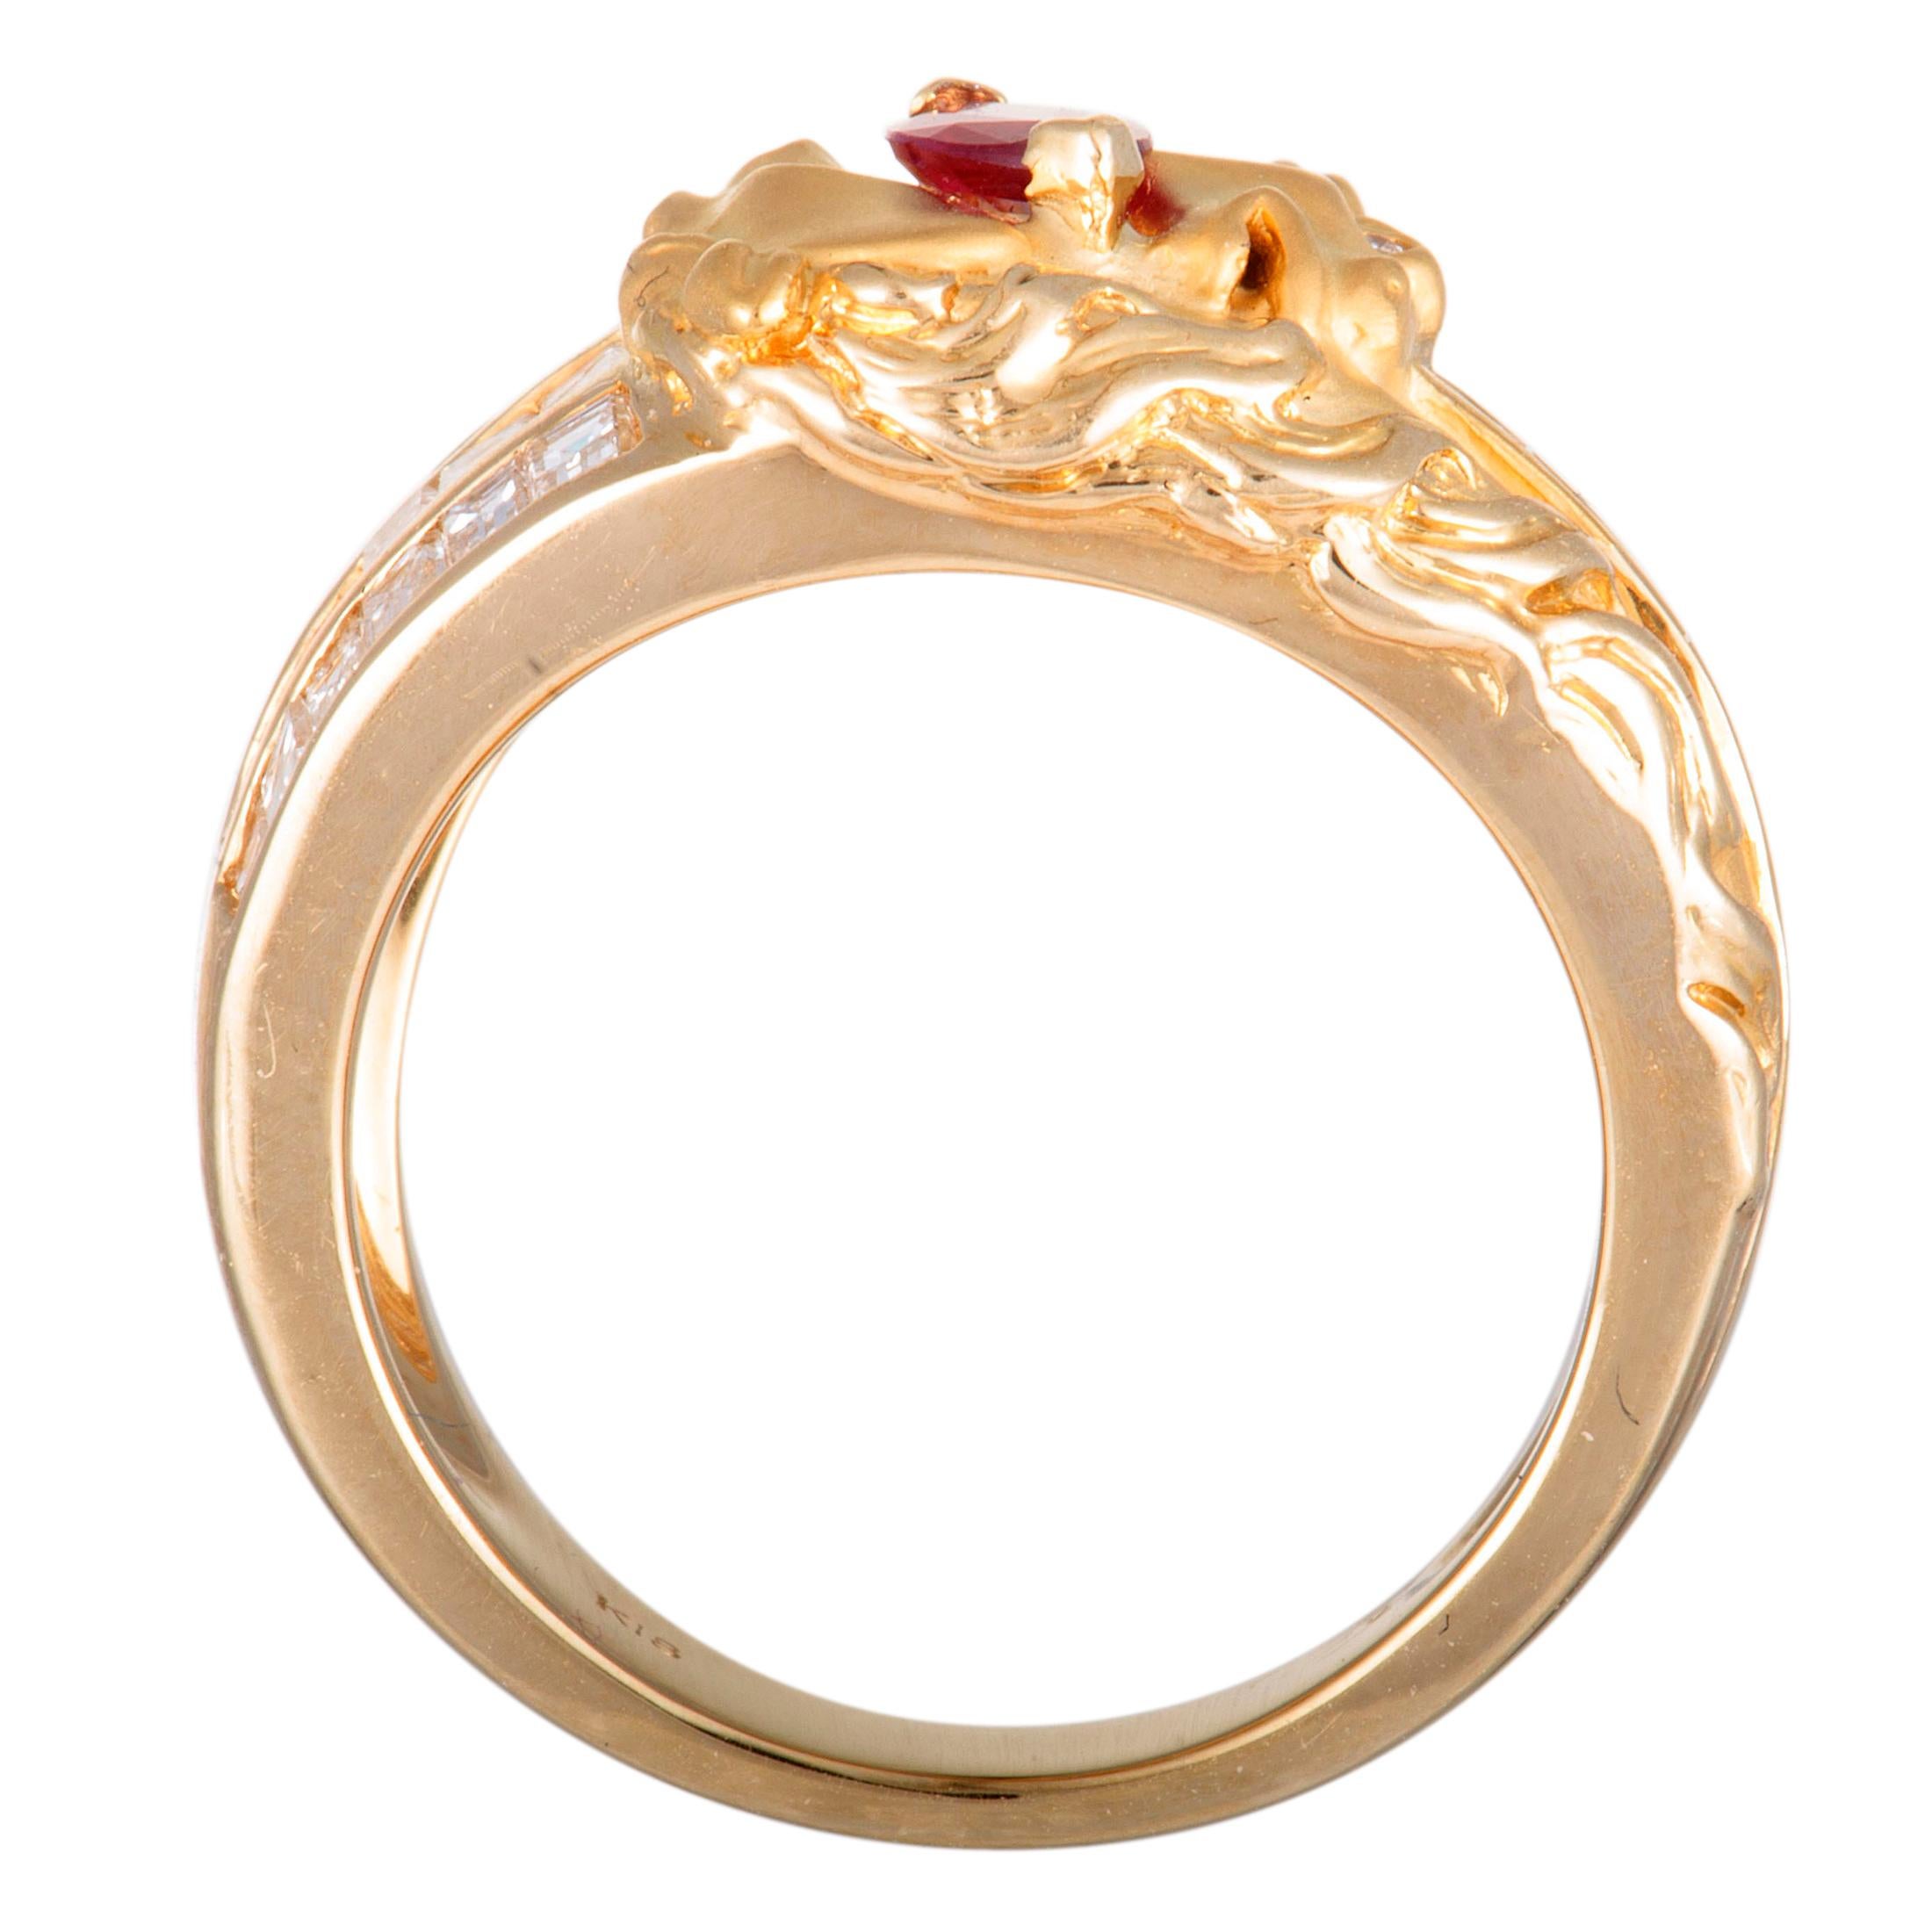 Boasting the ever-attractive horse motif, this stunning Carrera y Carrera ring will accentuate your look in a most fashionable manner. Wonderfully made of 18K yellow gold, the ring is embellished with 1.00 carat of resplendent diamonds and with an